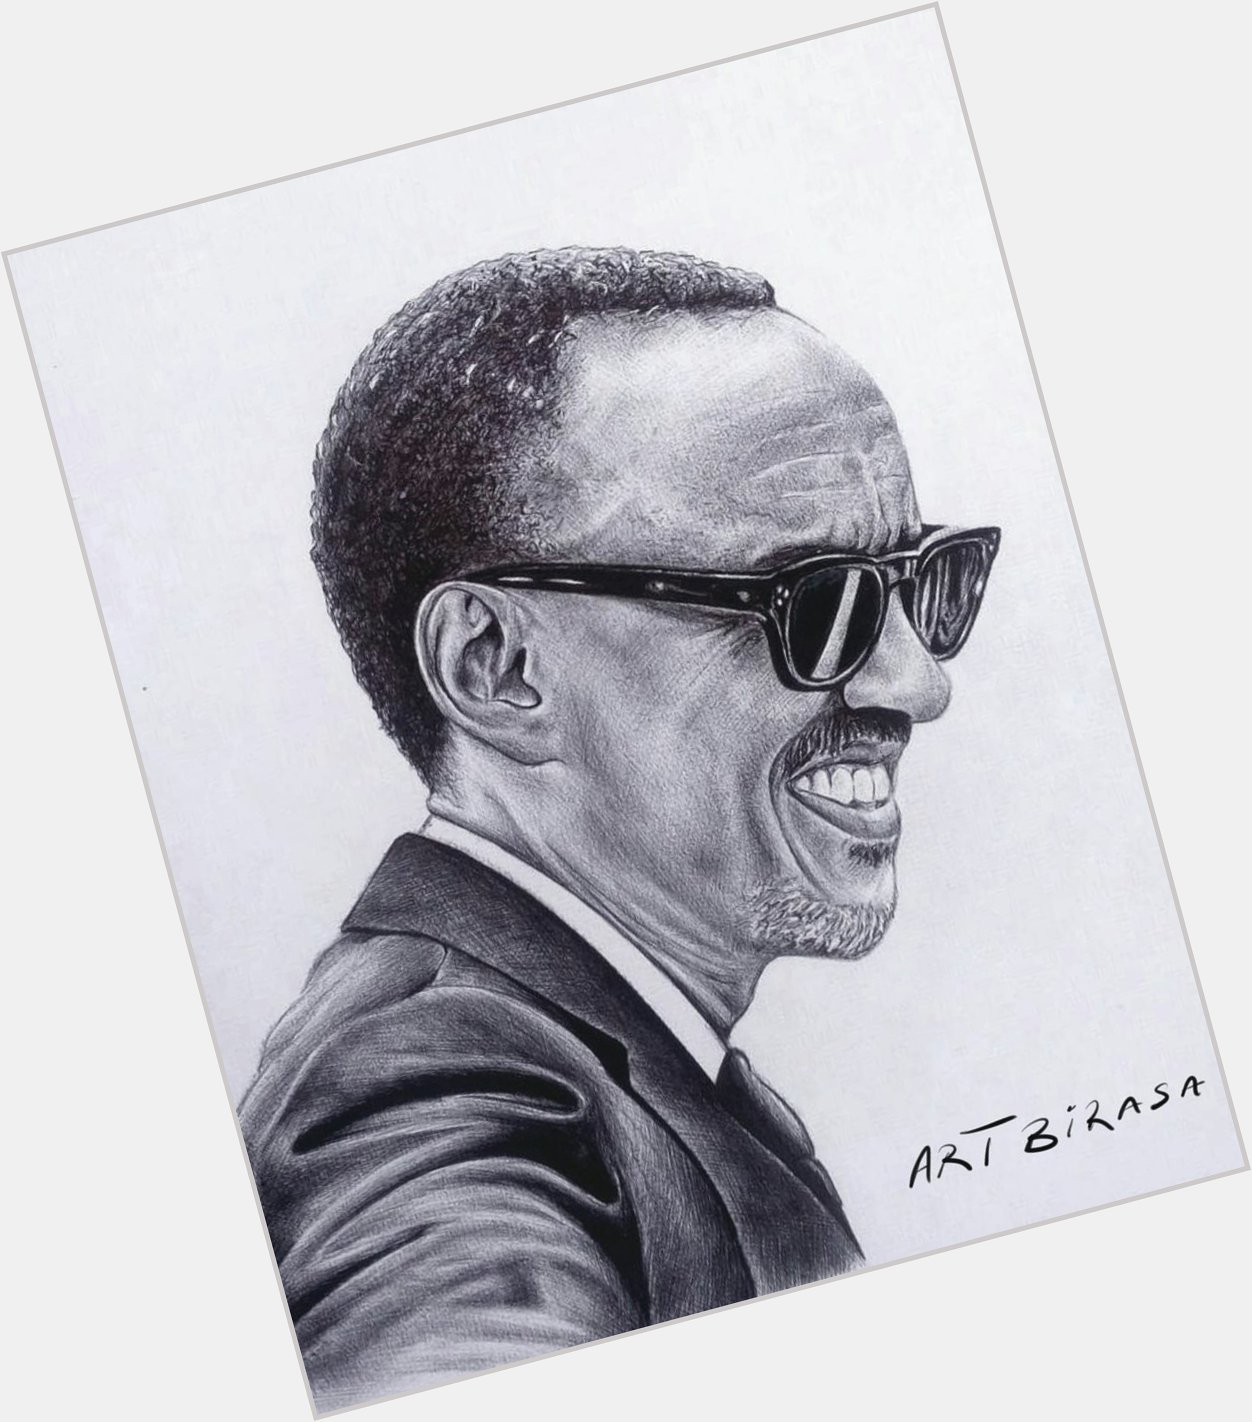 Happy birthday H.E Paul KAGAME
We for you God bless yo   